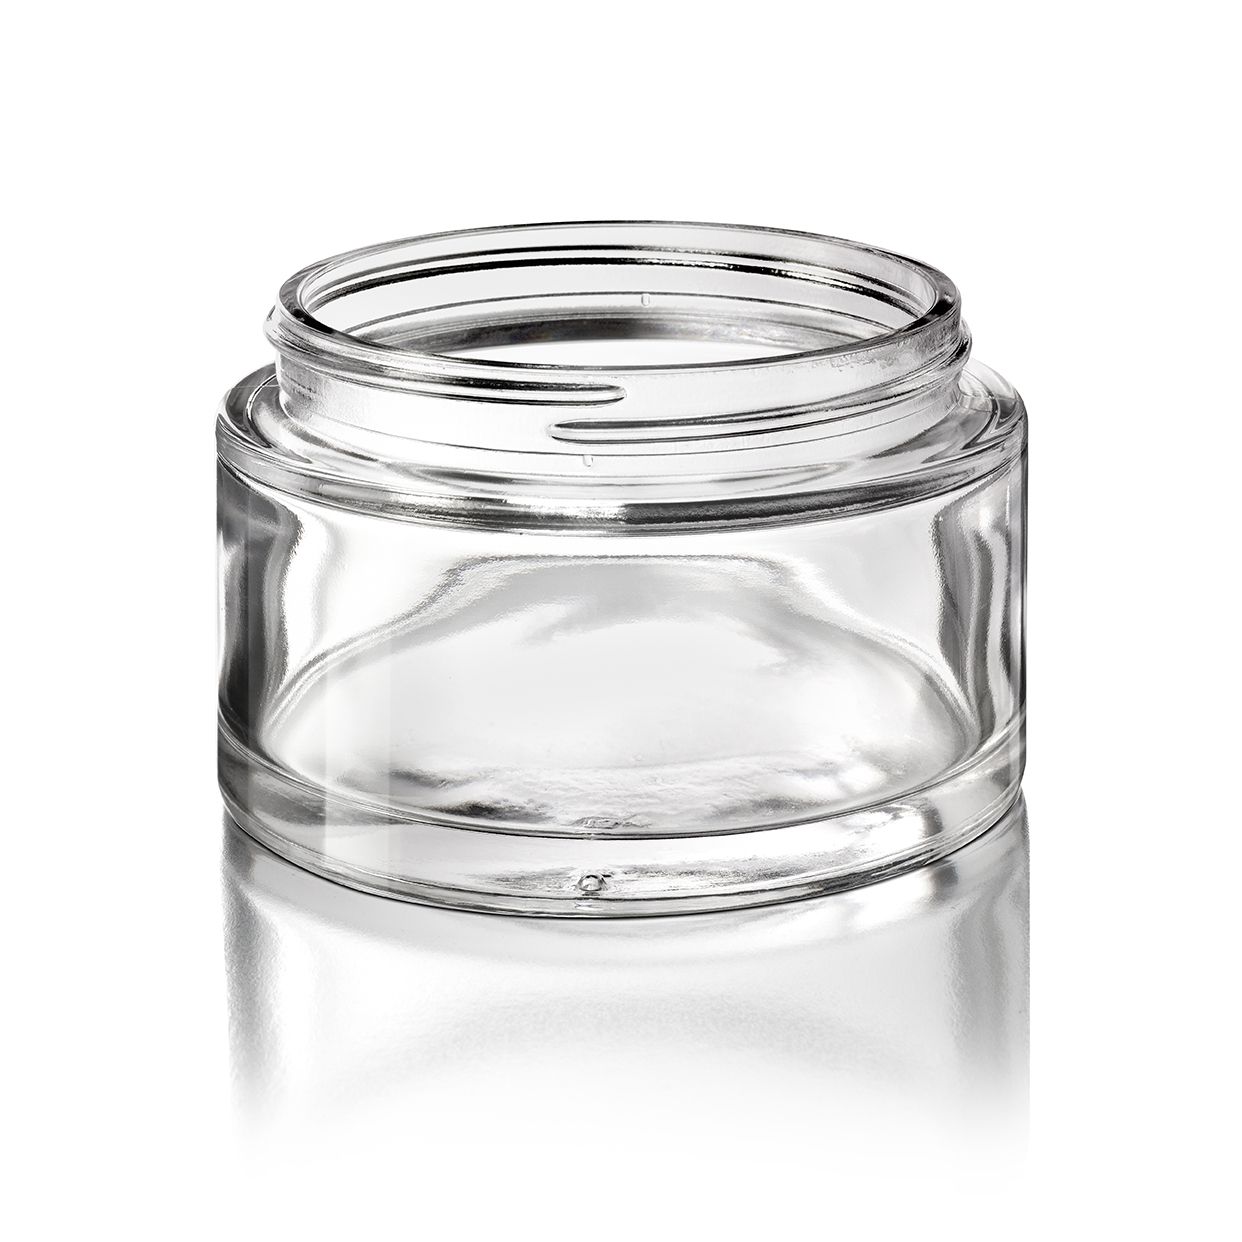 Cosmetic jar Camellia 240 ml, 85 special thread, fit for child-resistant lid, Flint